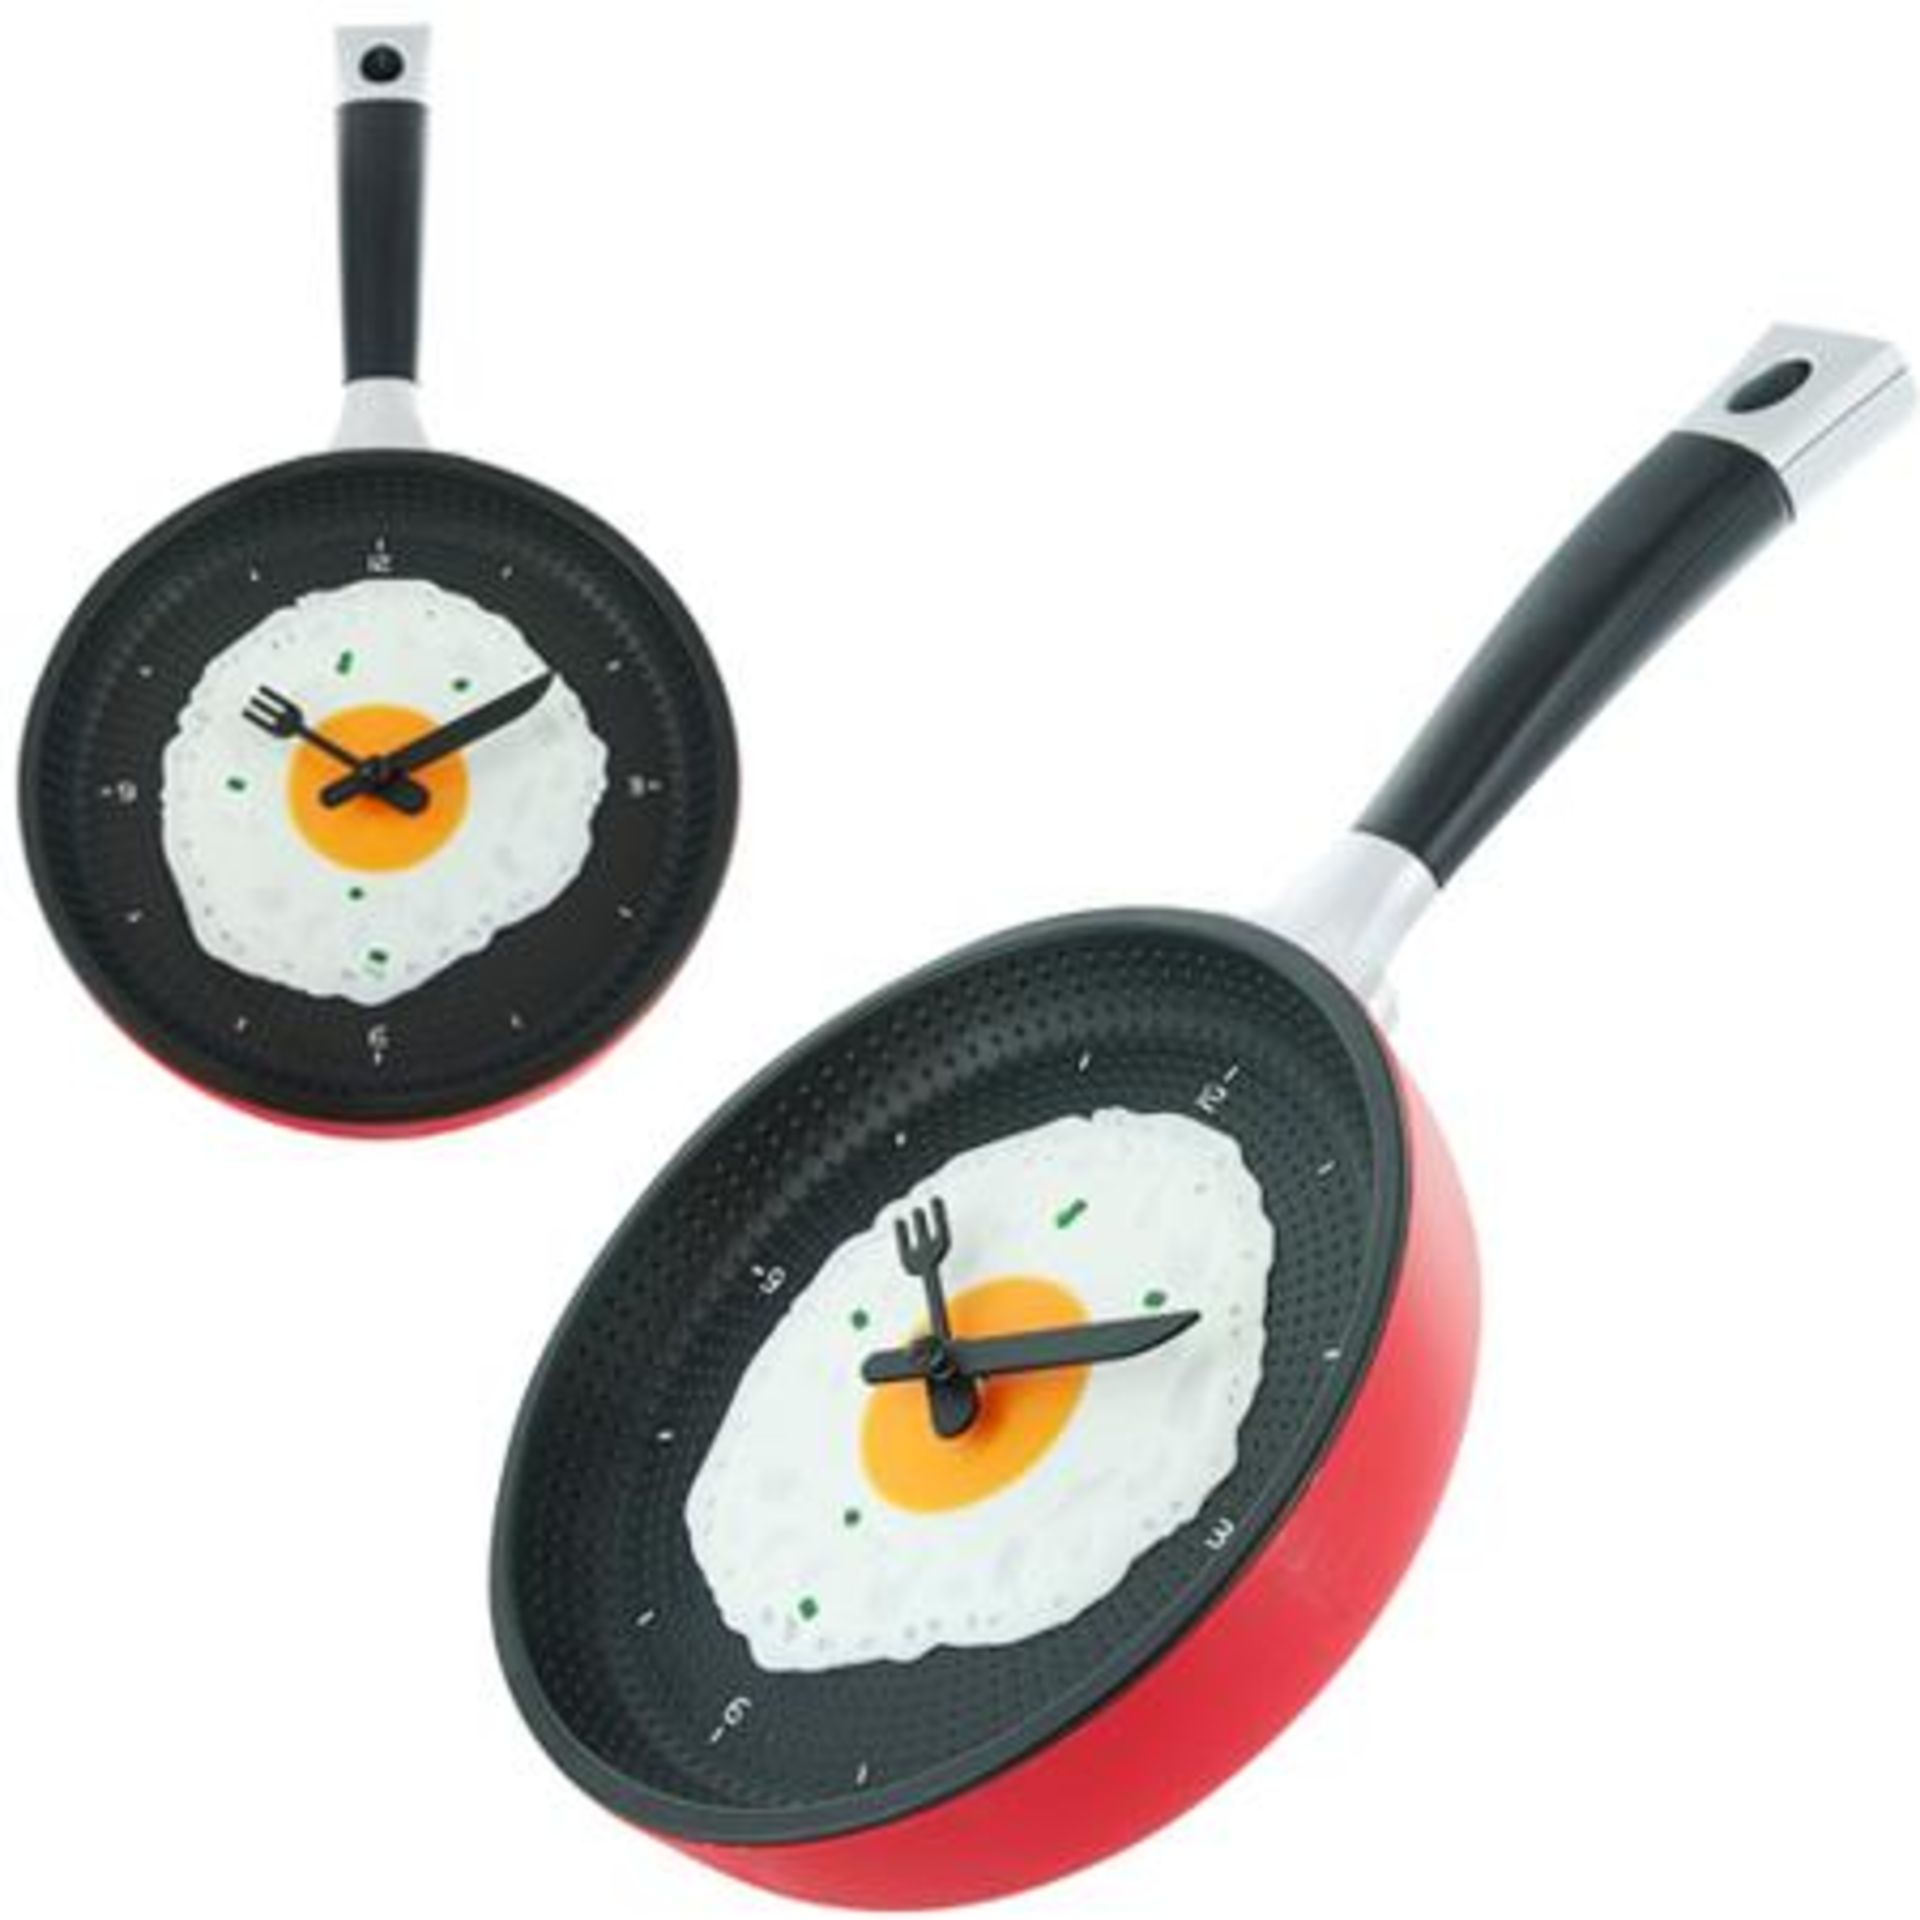 V *TRADE QTY* Brand New Frying Pan Wall Clock (Colour may vary) X 5 YOUR BID PRICE TO BE